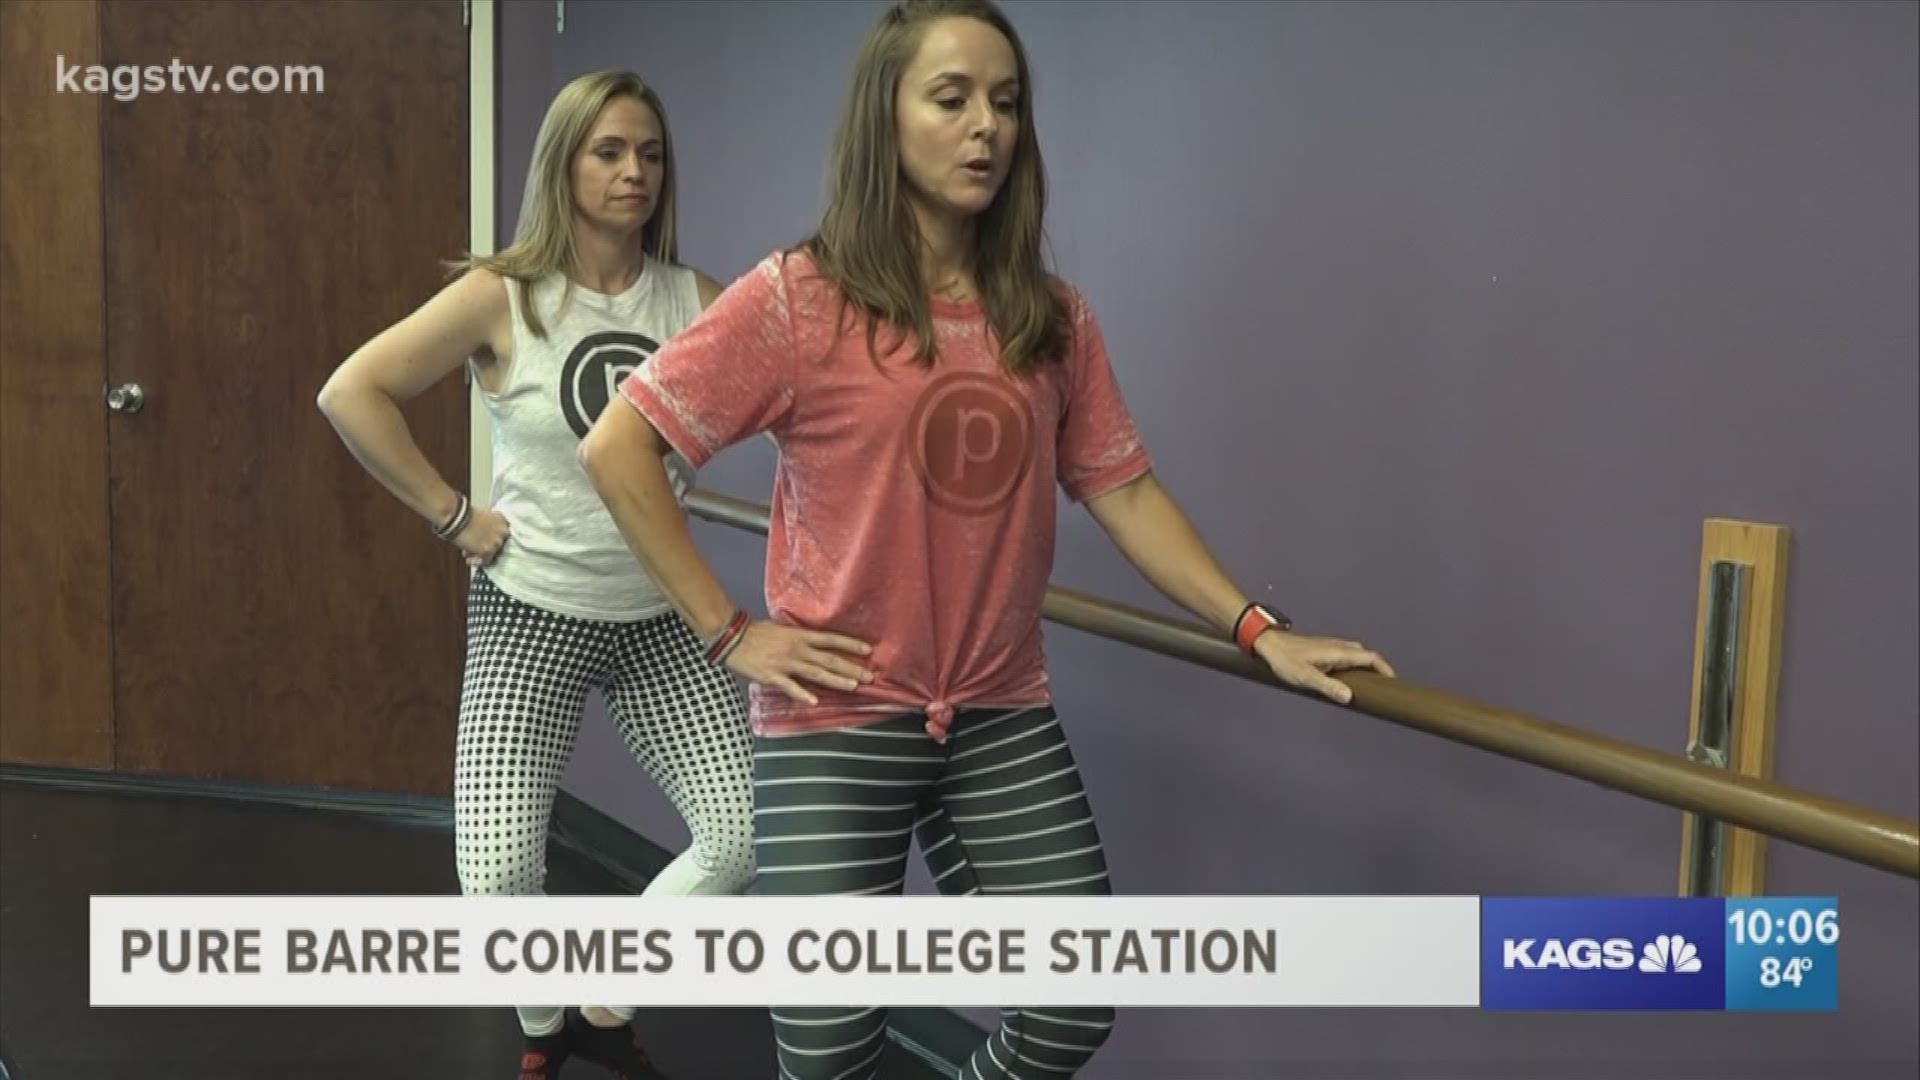 Pure Barre is an exercise trend that has been around for quite a while, but it has finally come to College Station. The new studio is opening up off of William D. Fitch Parkway in College Station and is expected to open in the fall of 2018.